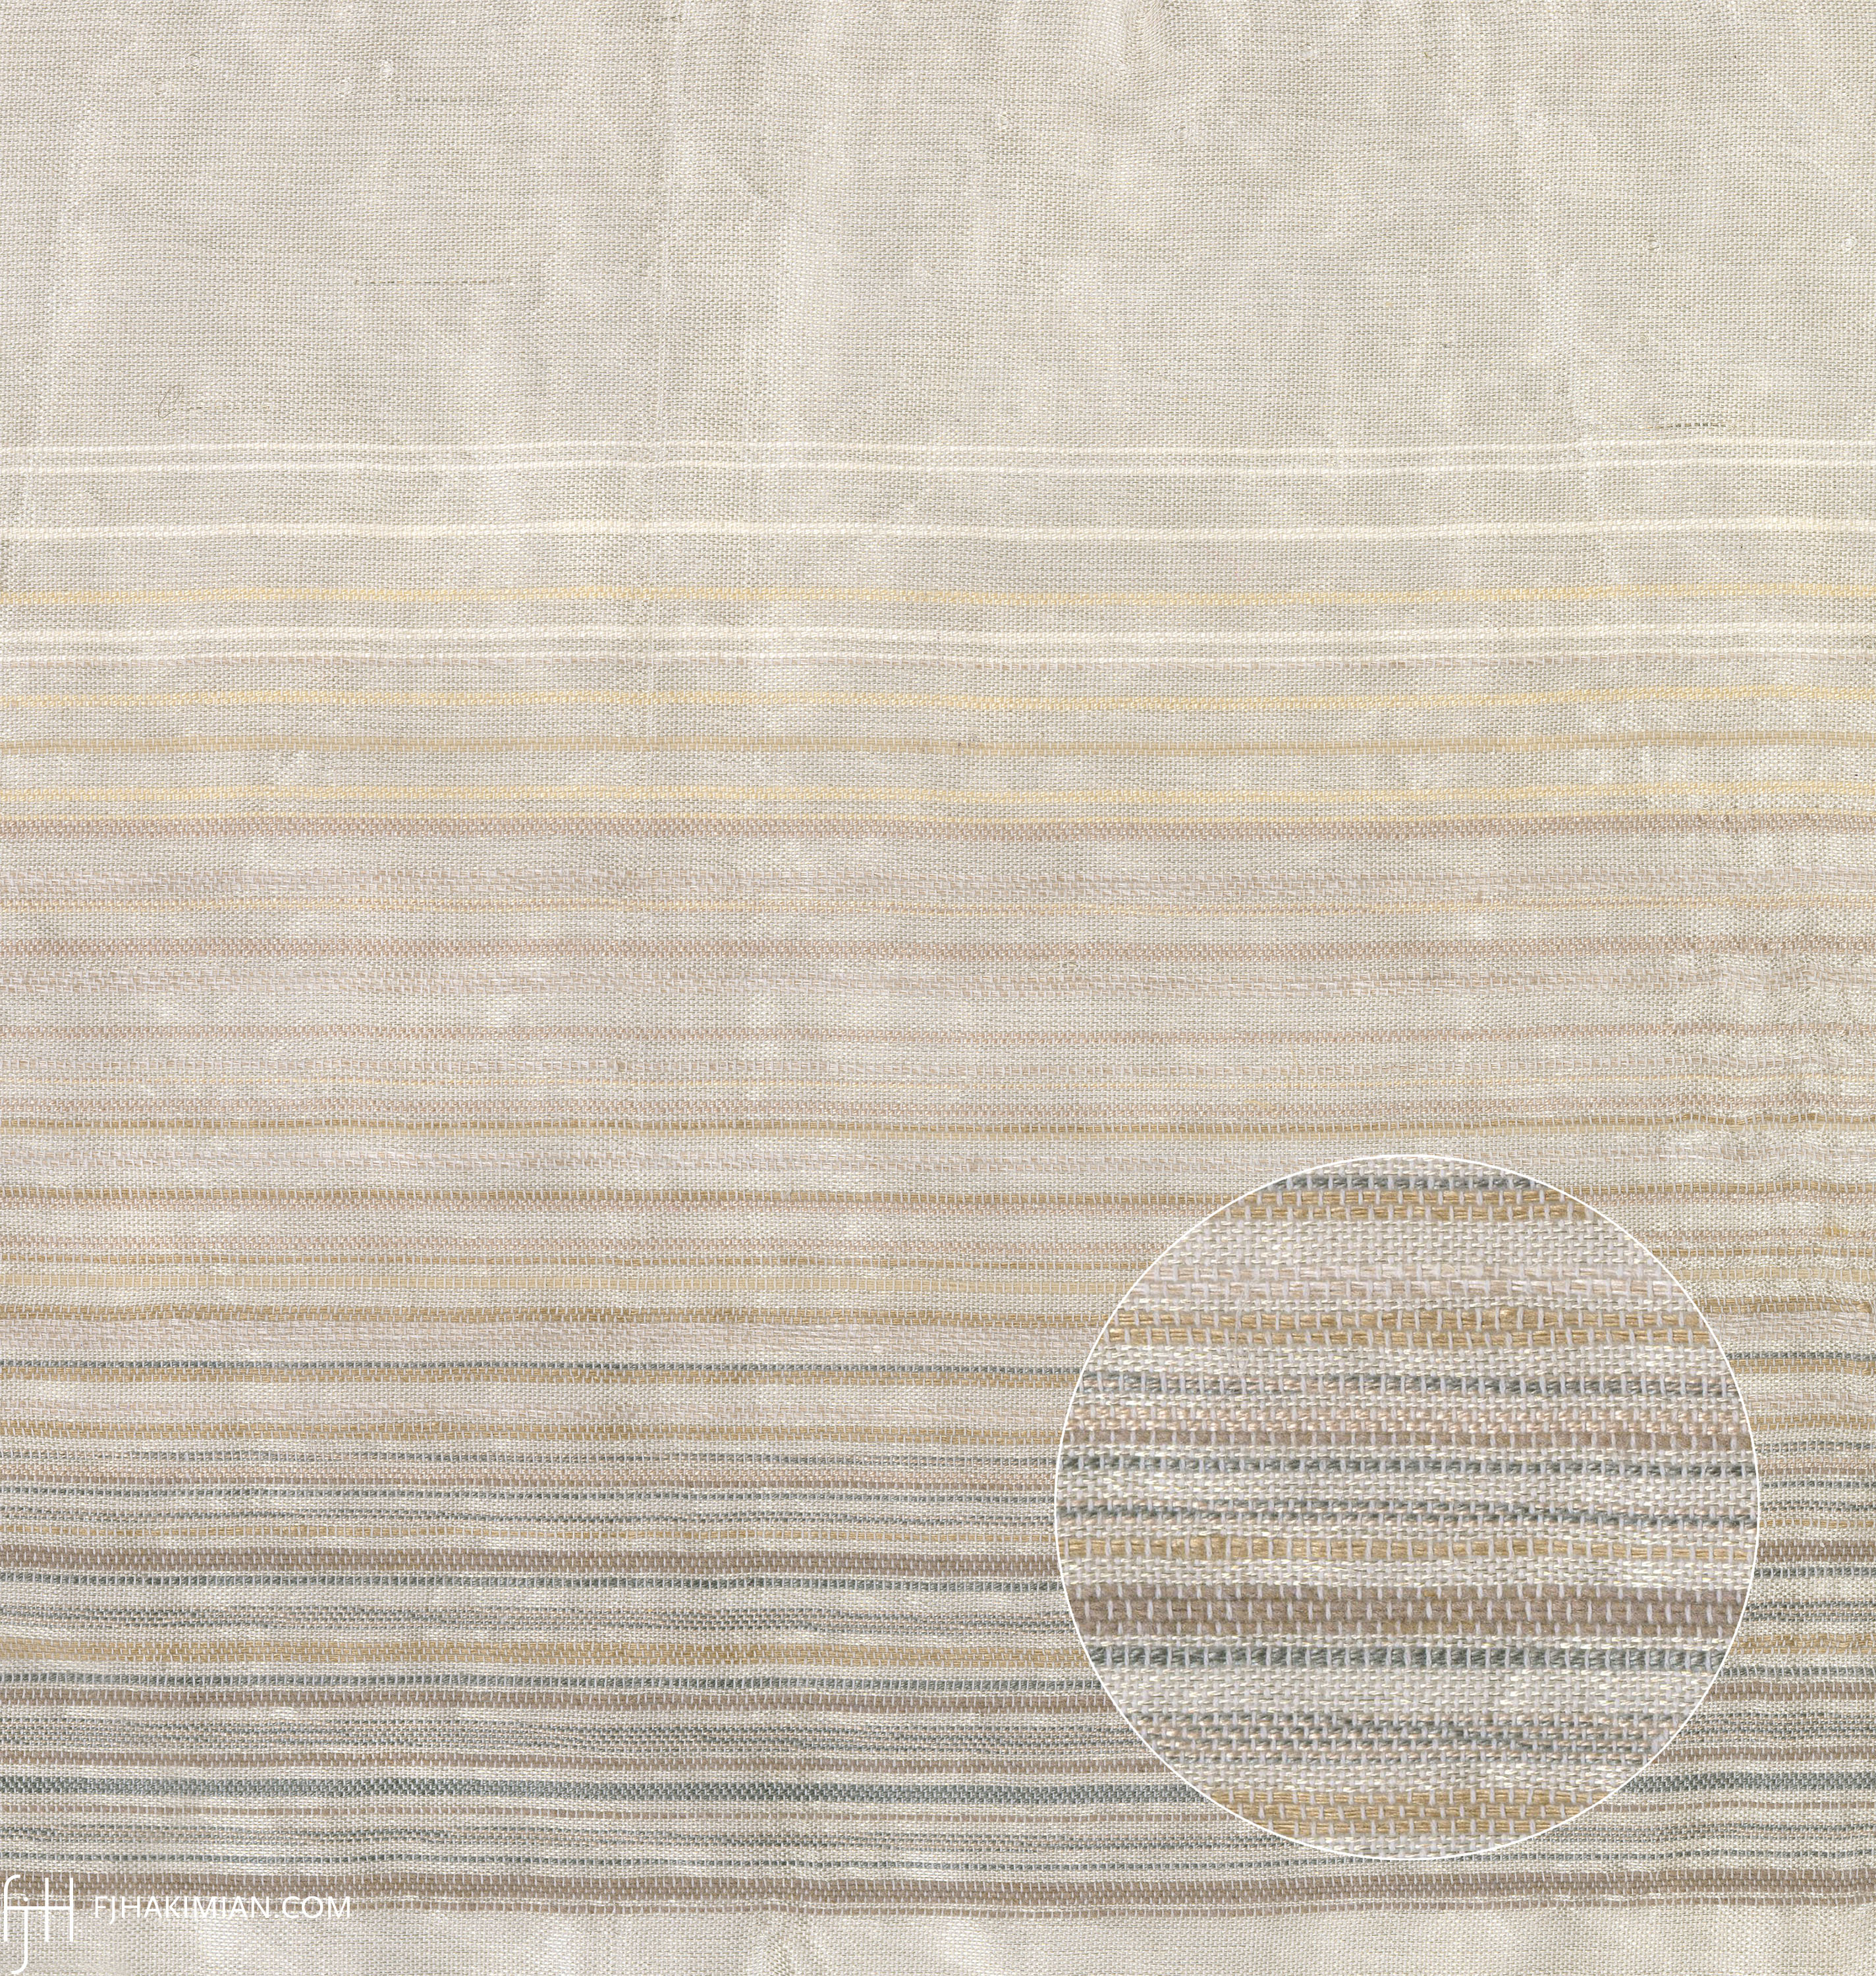 TO-Gradient Striped Copper Cotton Sheer Fabric | FJ Hakimian Carpet Gallery, New York 